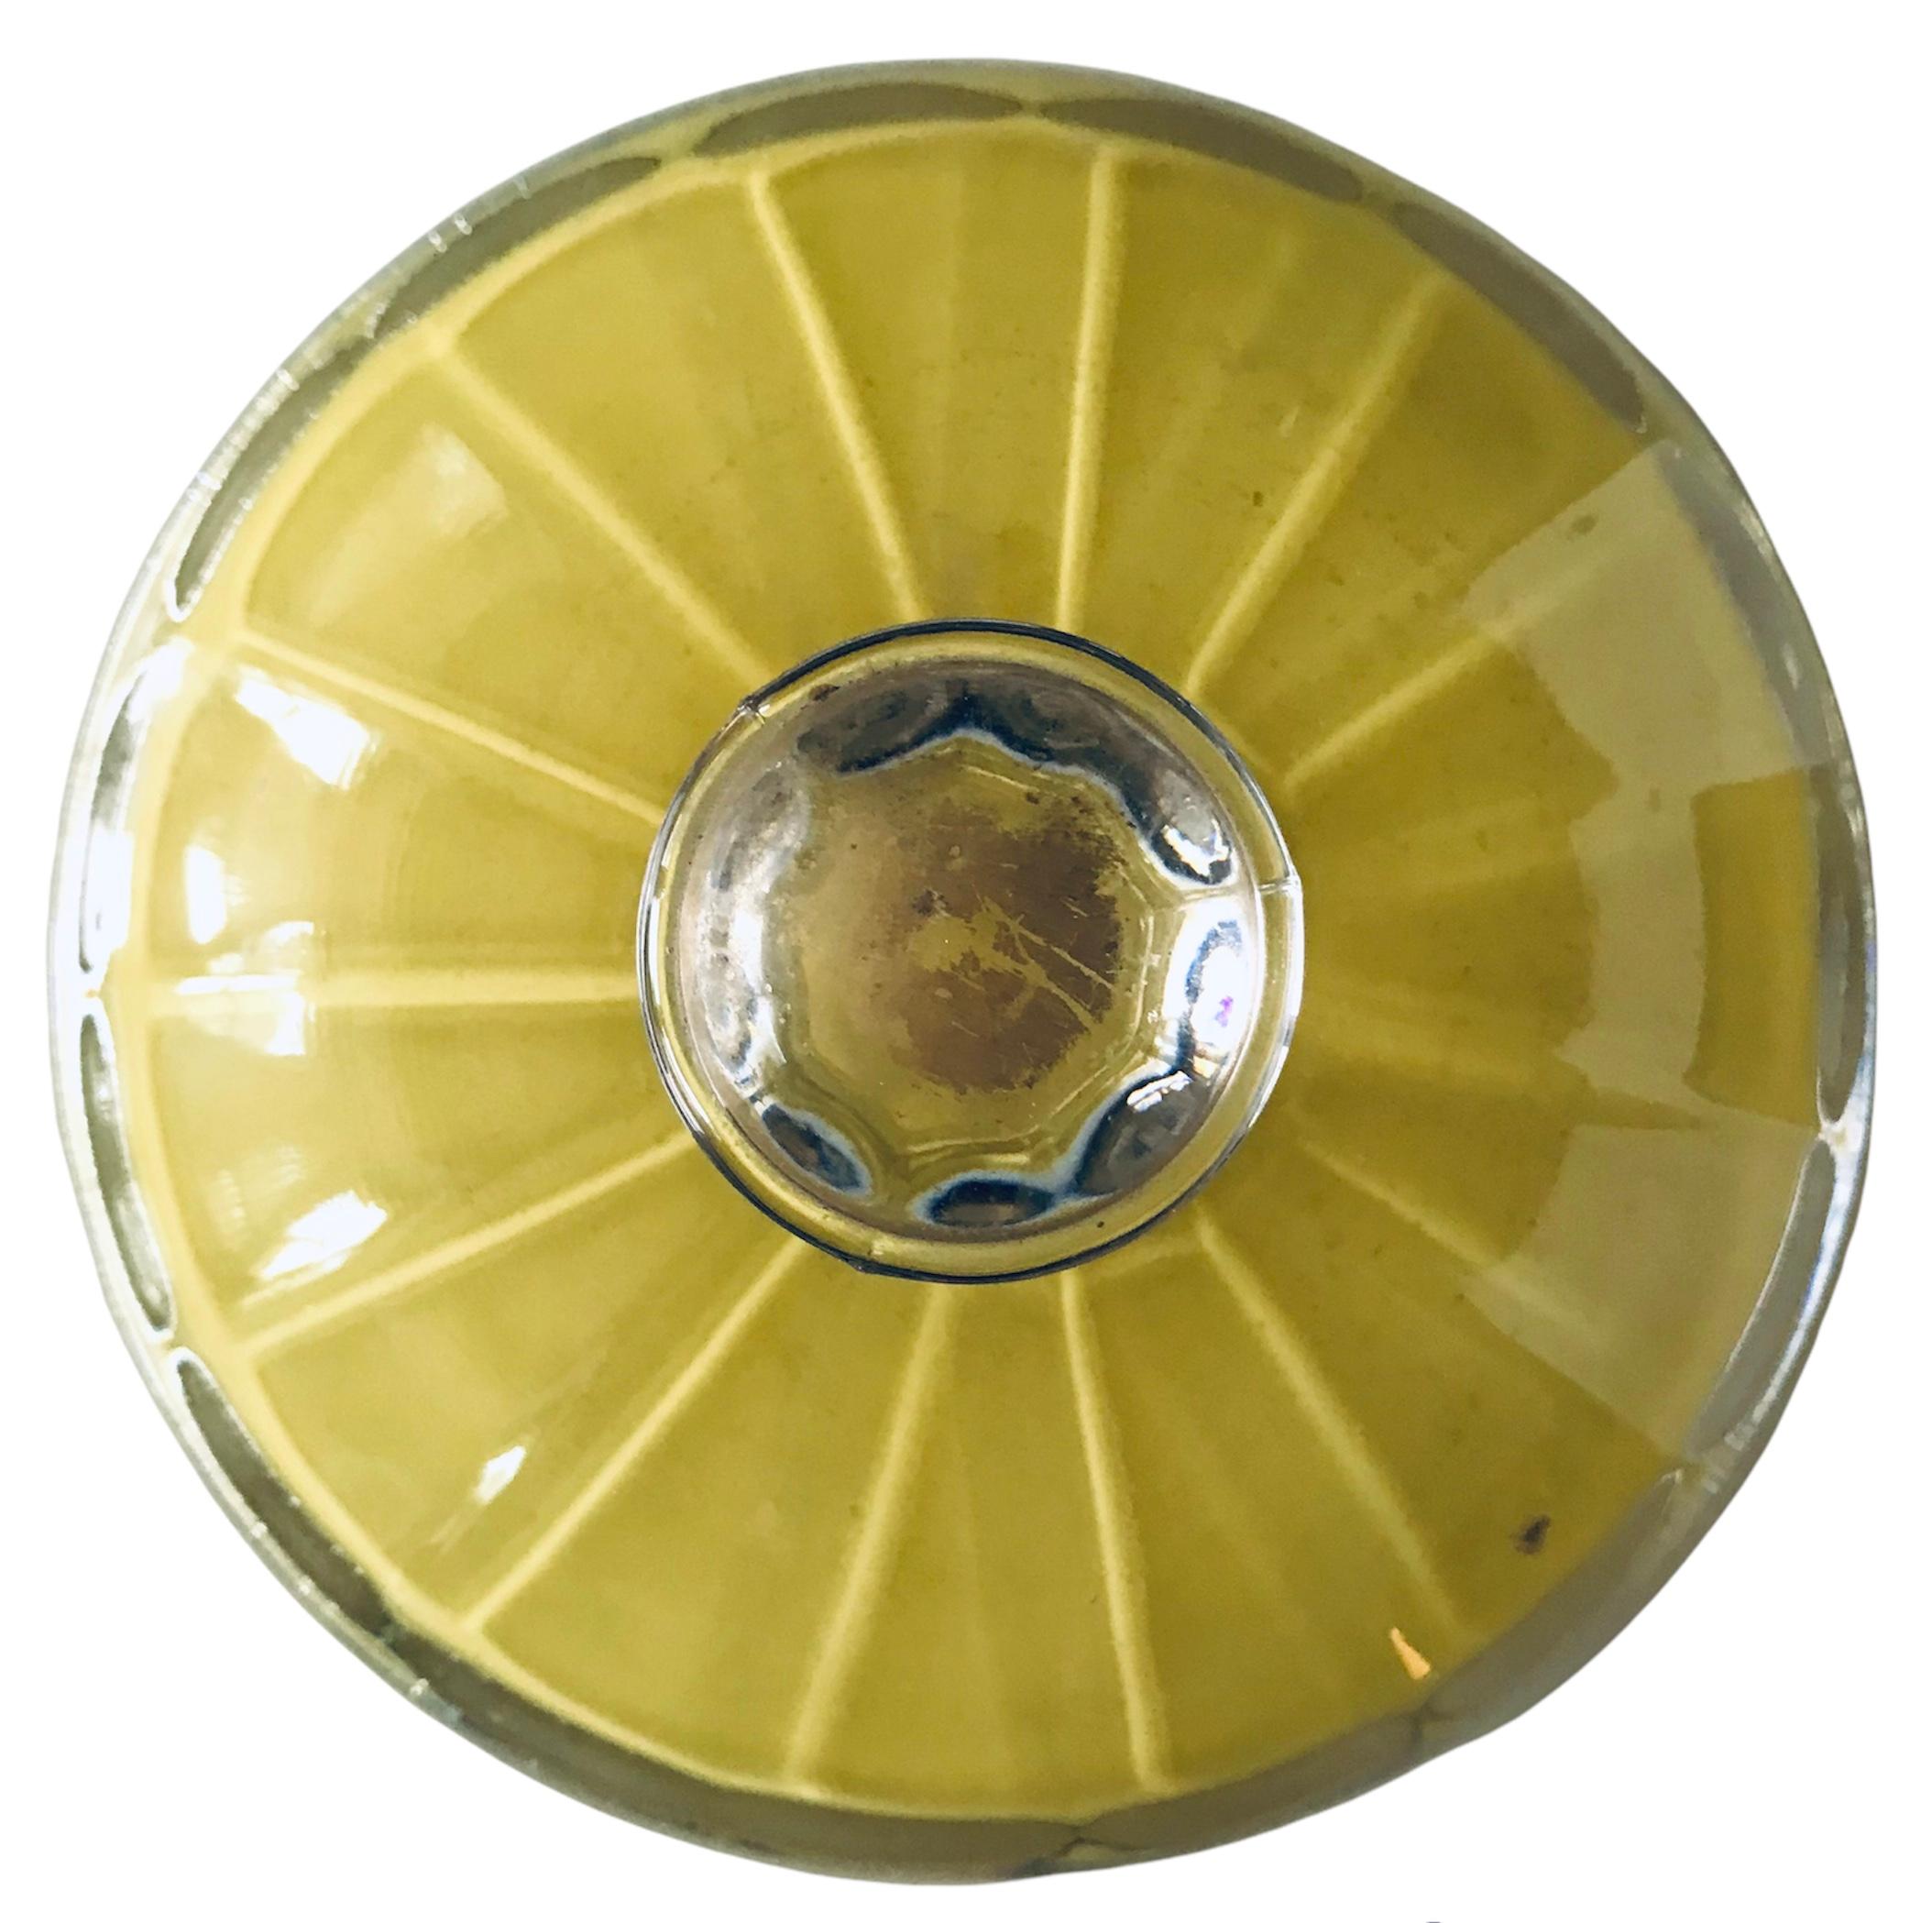 Stunning Early 20th Century Vaseline Glass Candy dish. The hand-blown dish displays a yellow ribbed body with a handsome thick black and thin gold rings on a clear glass pedestal base.